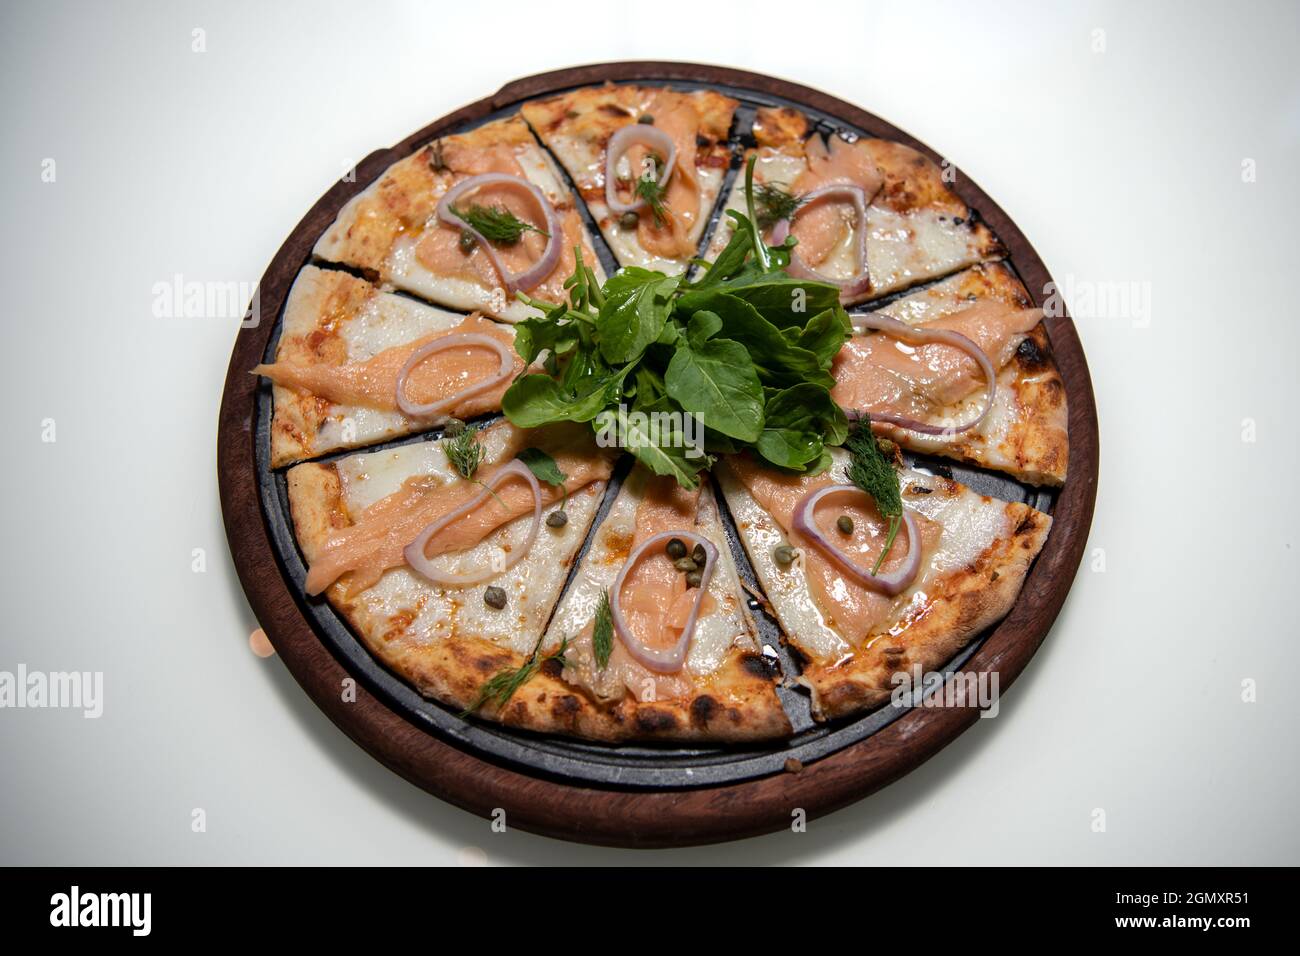 Pastry oven food cheese pizza manouche. Labnani food.Turkish version of Italian pizza with extra cheese Stock Photo